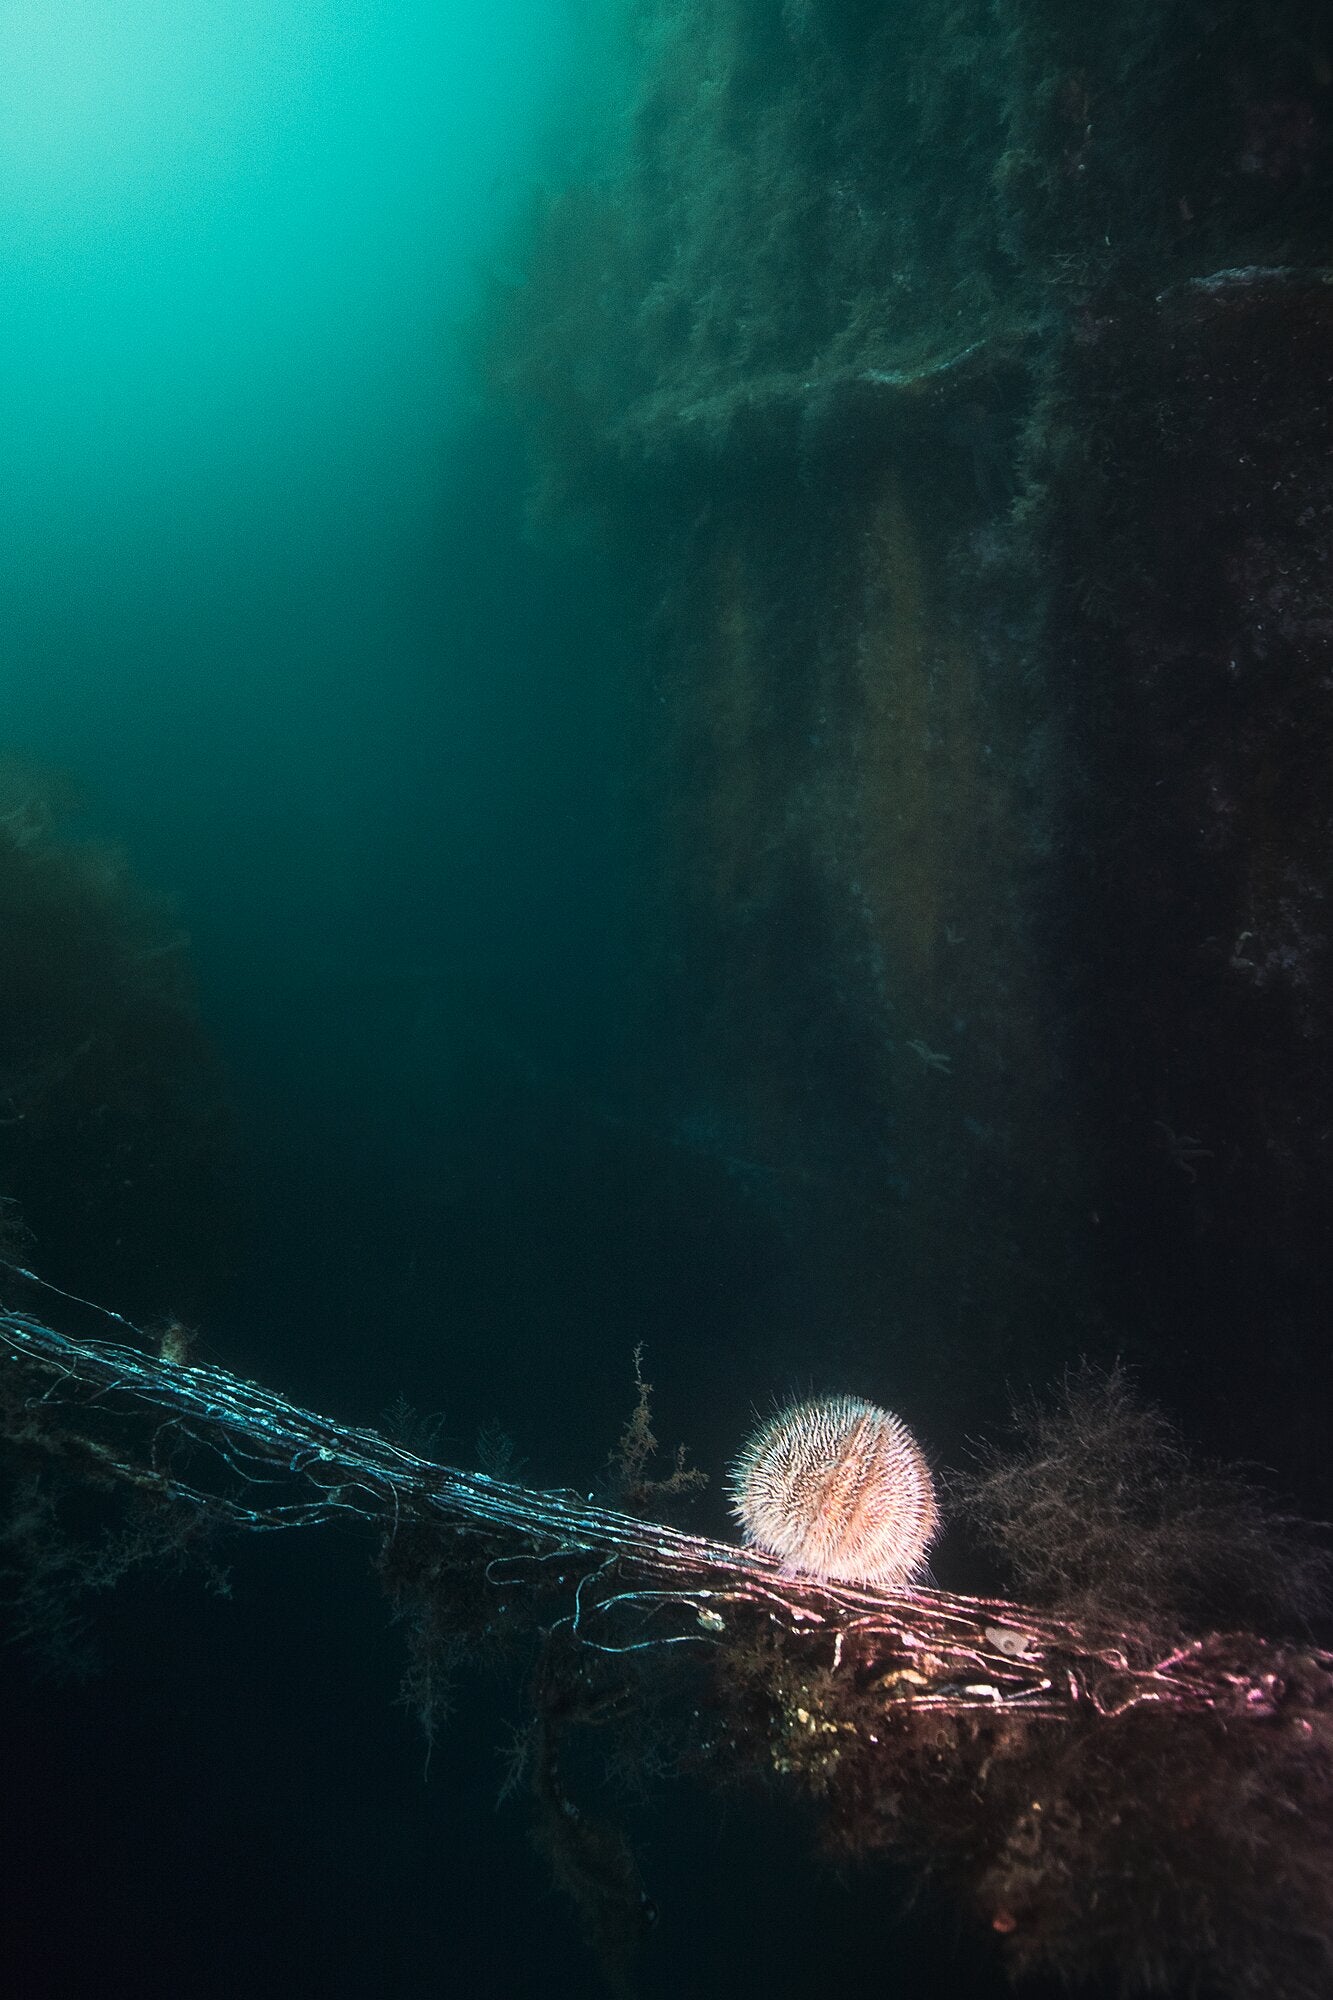 An eerie atmosphere is evoked by a photograph of a sea urchin situated near a sunken wreck.